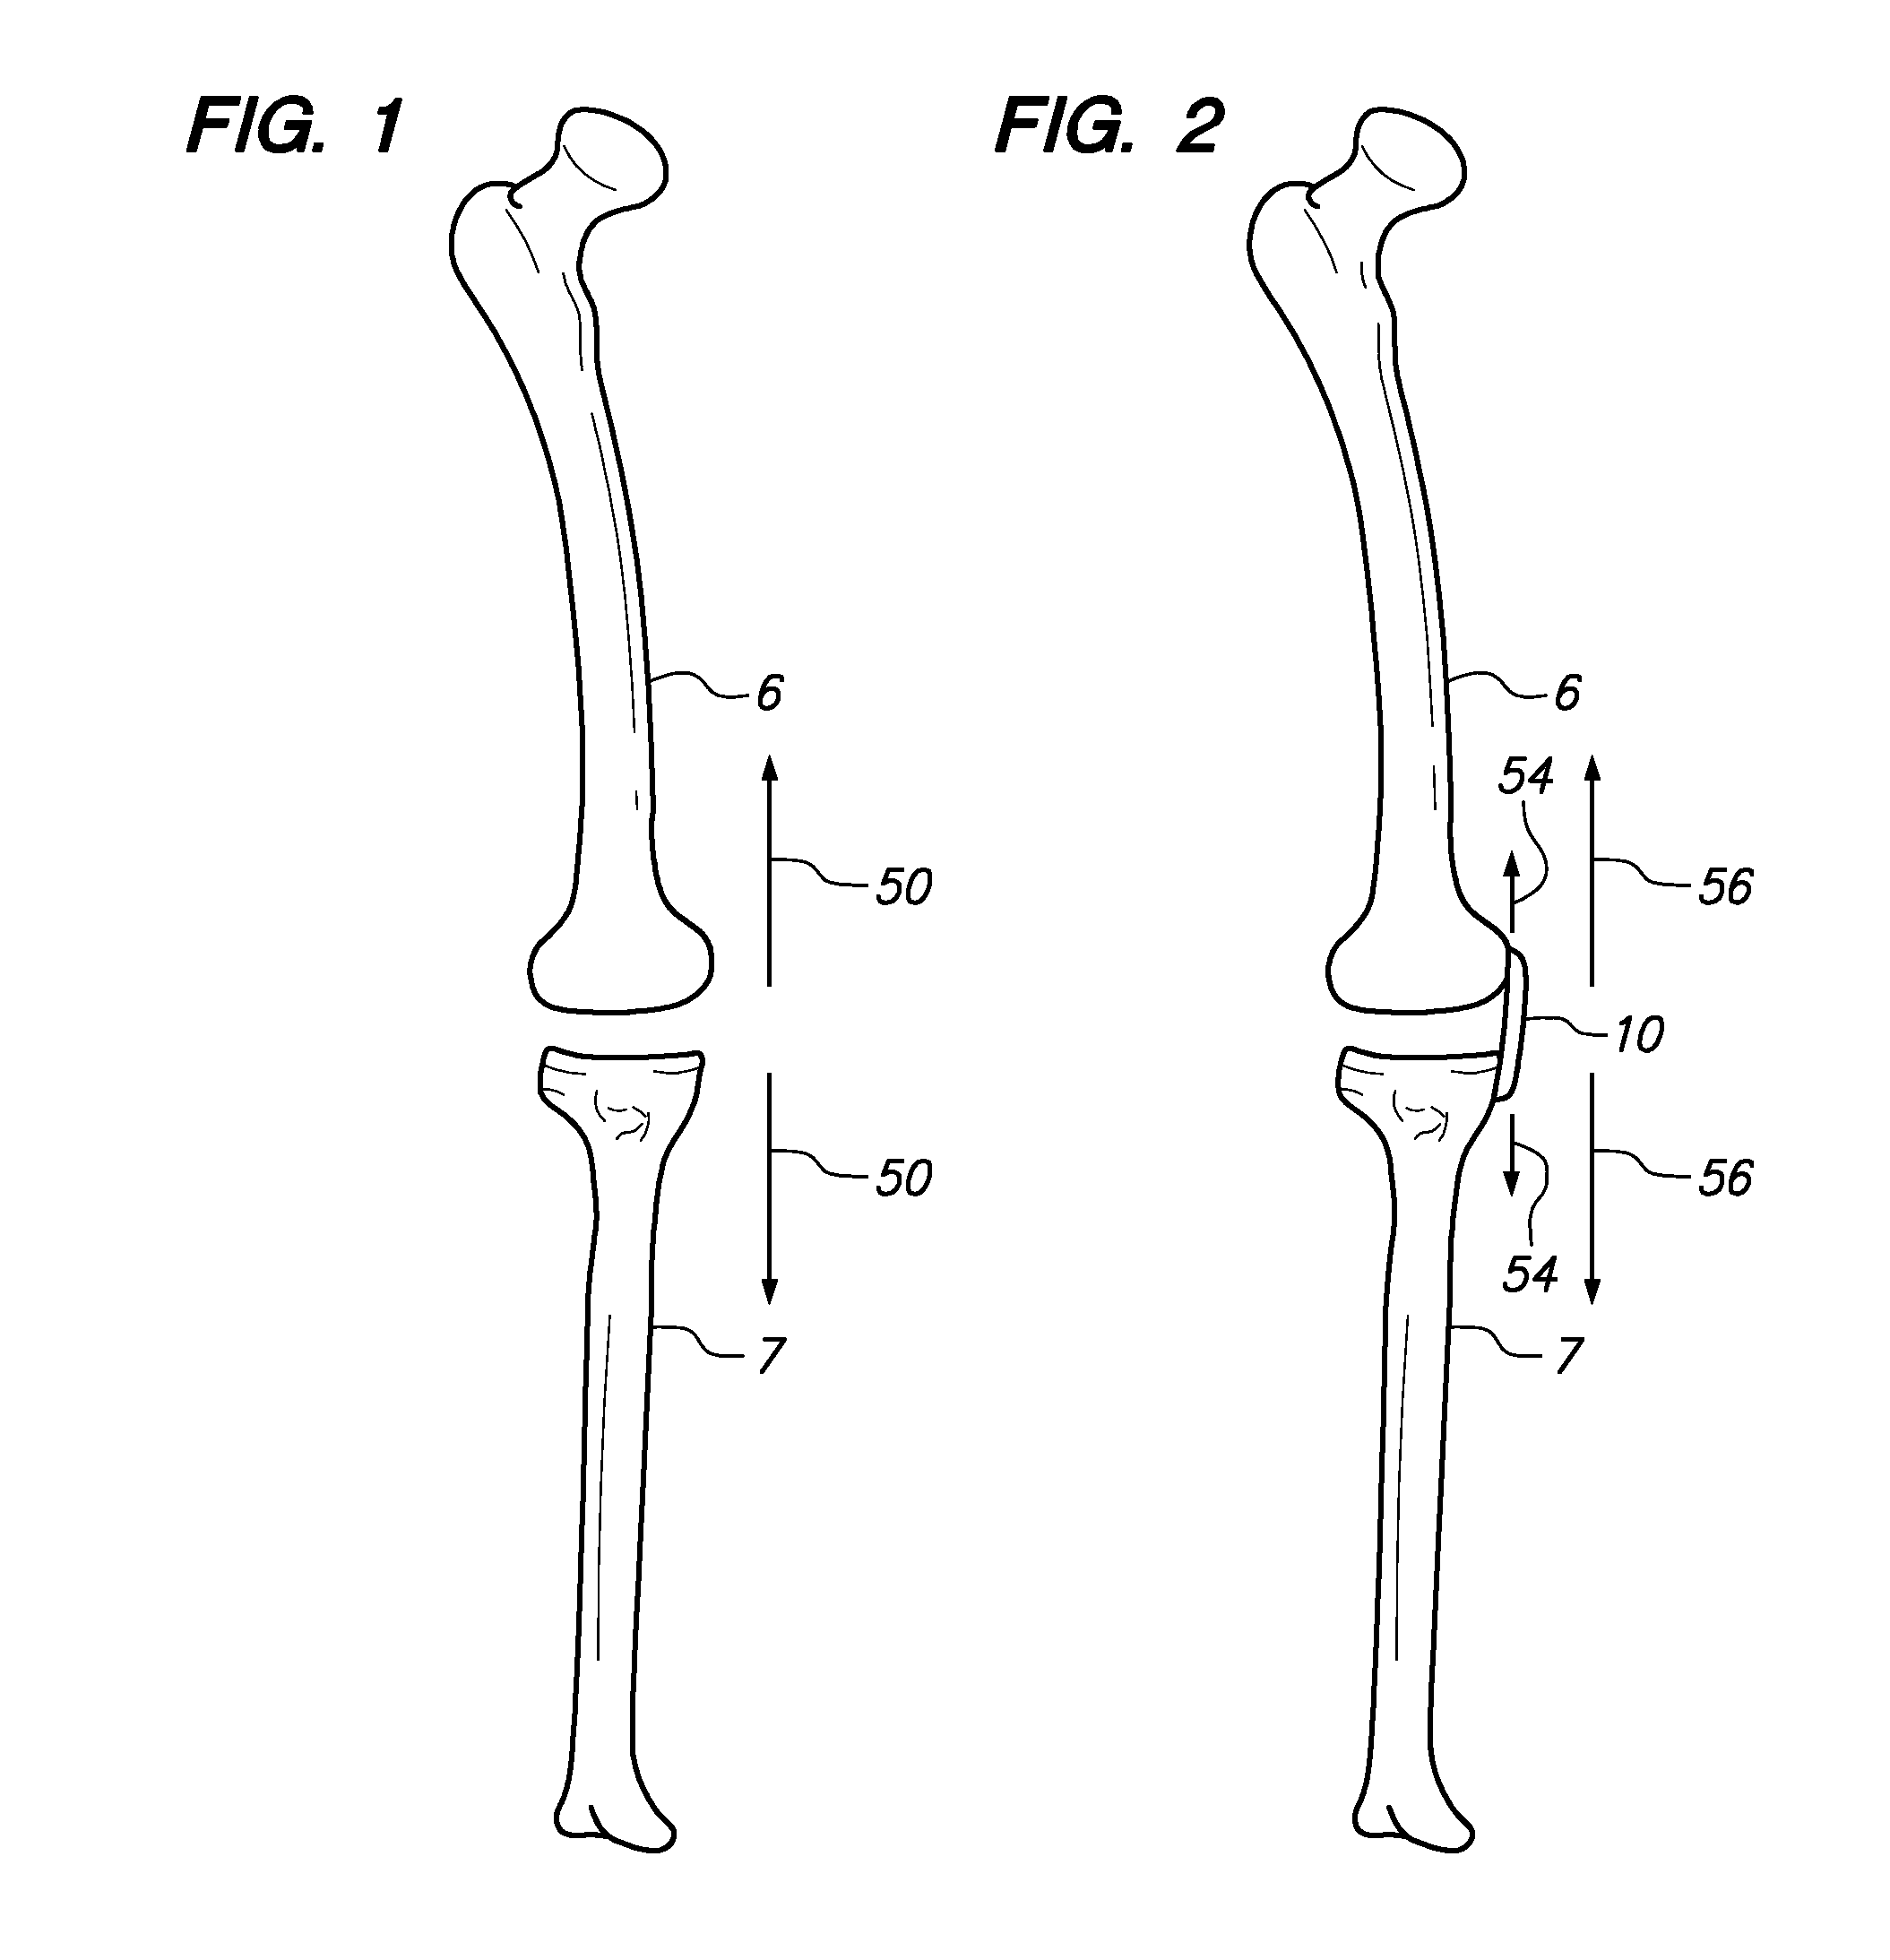 Extra-articular implantable mechanical energy absorbing assemblies having a tension member, and methods